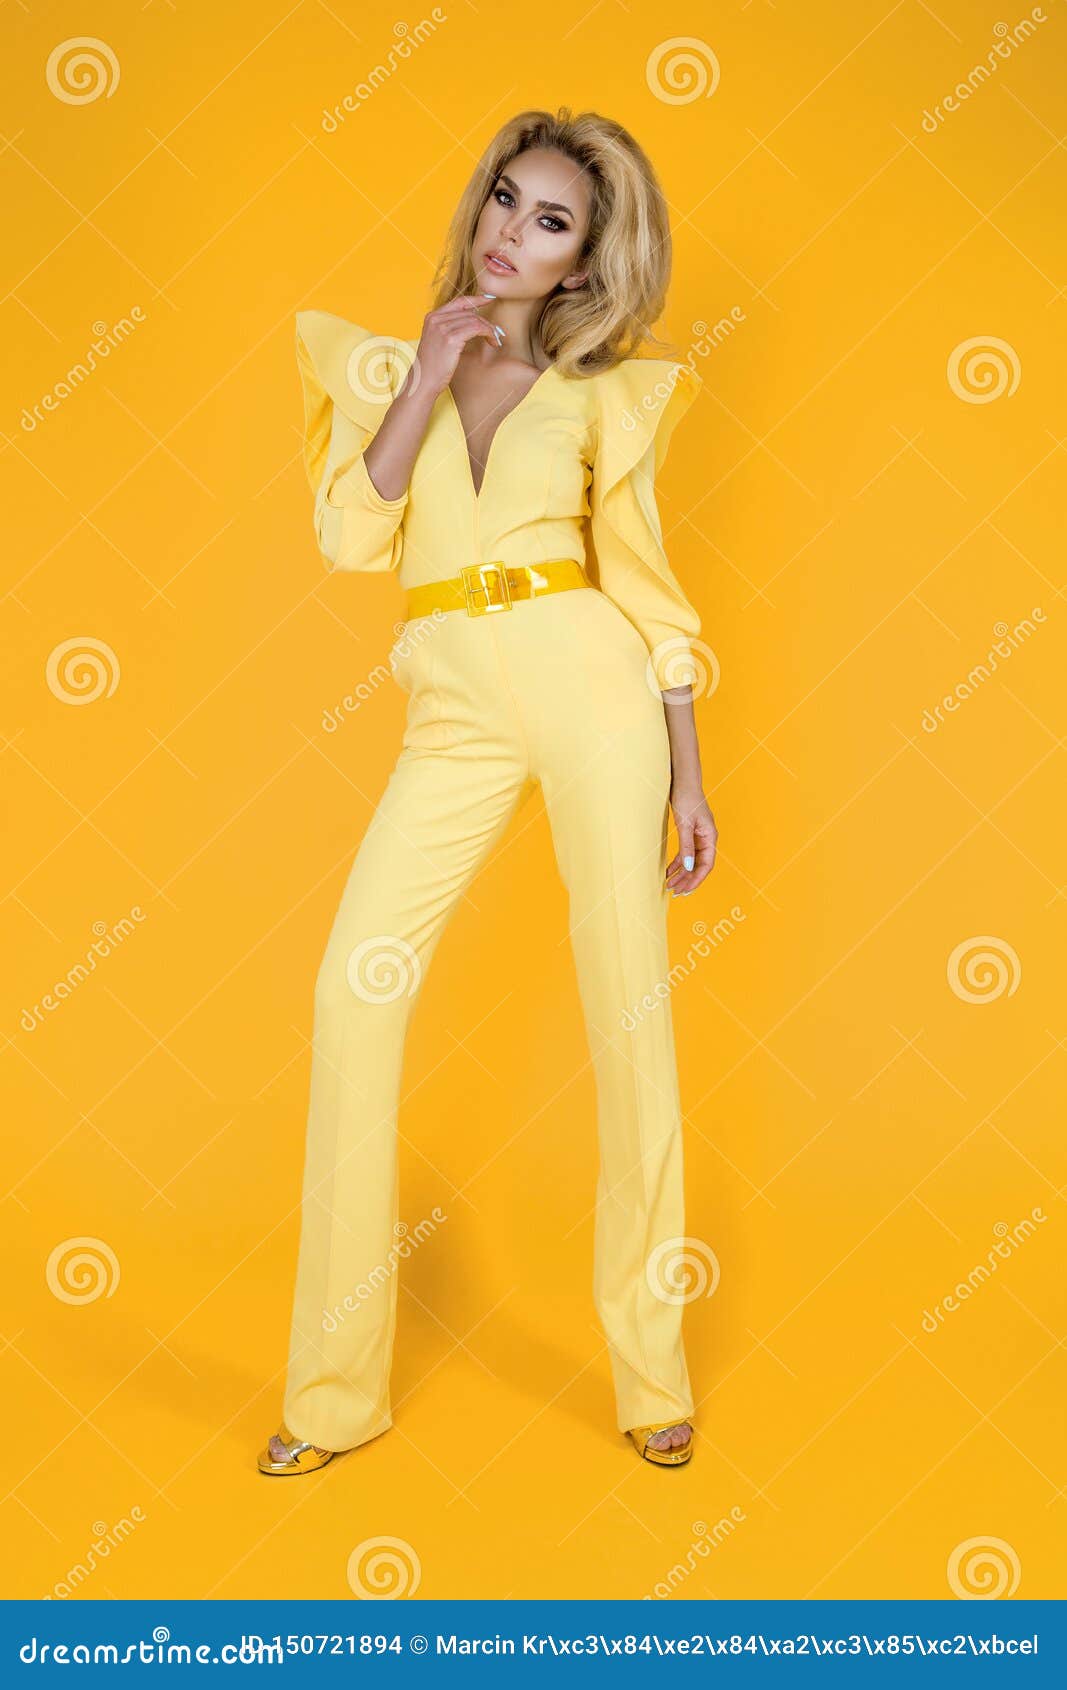 Fashionable Woman in Nice Yellow Jumpsuit, Shoes and Accessories ...